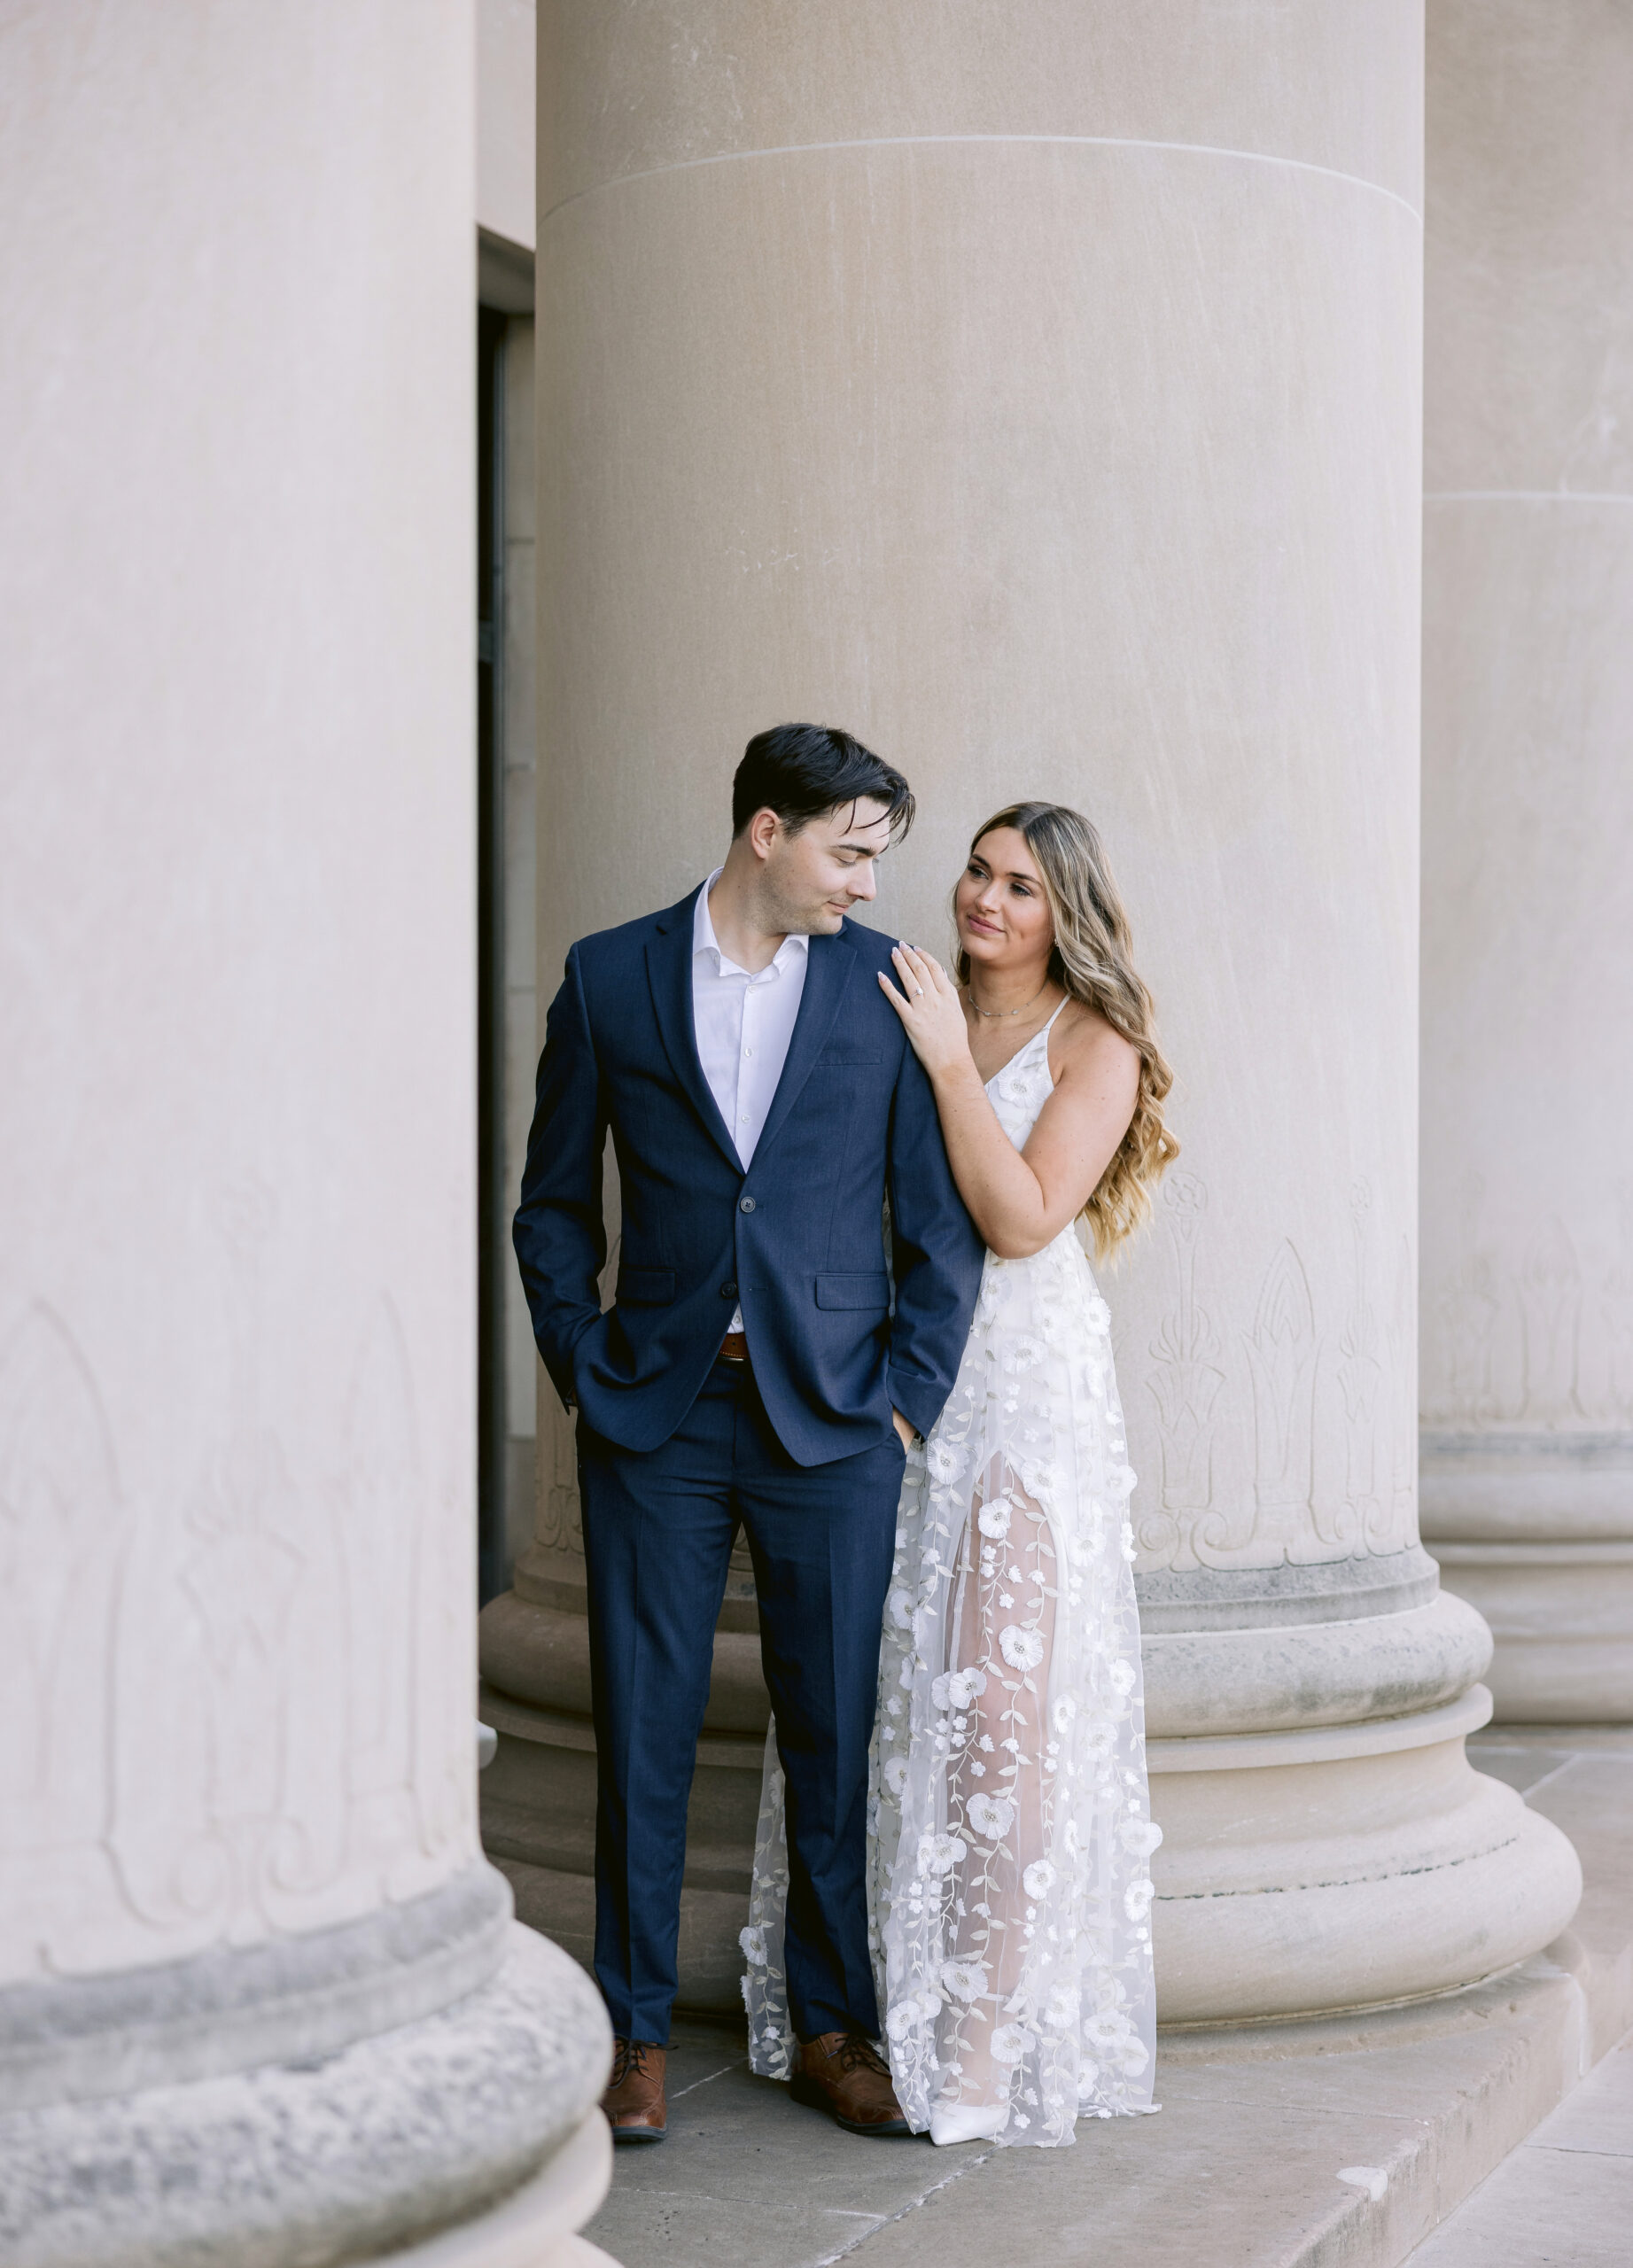 Engagement session in Springfield, Missouri. Wedding Photography by Tatyana Zadorin Photography